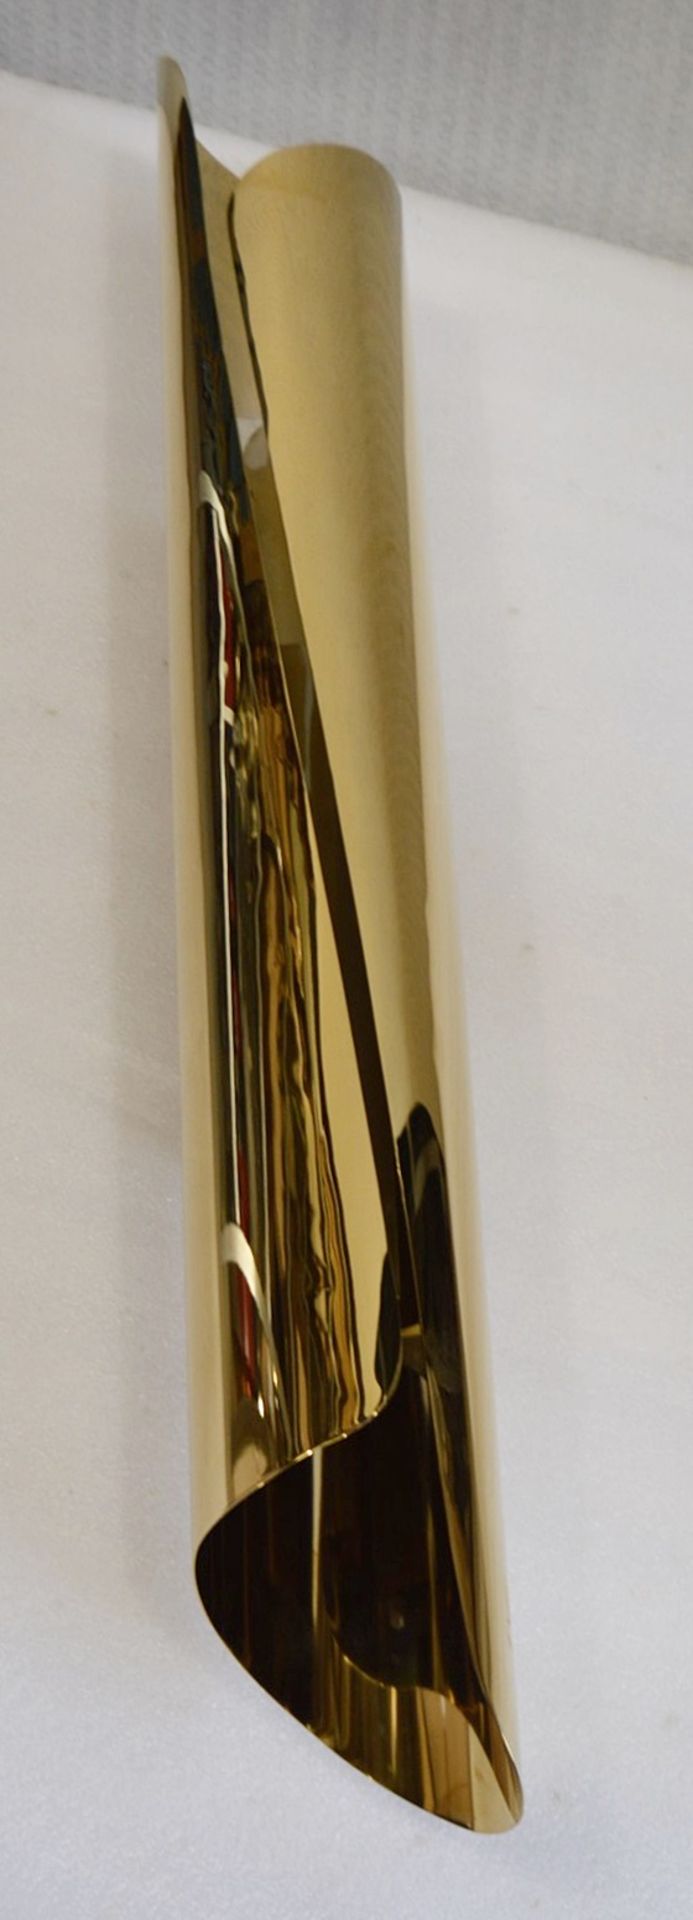 1 x 1-Metre Tall CHELSOM LED 'Curled' Wall Light / Sculptural Display Piece In A Polished Brass - Image 8 of 11